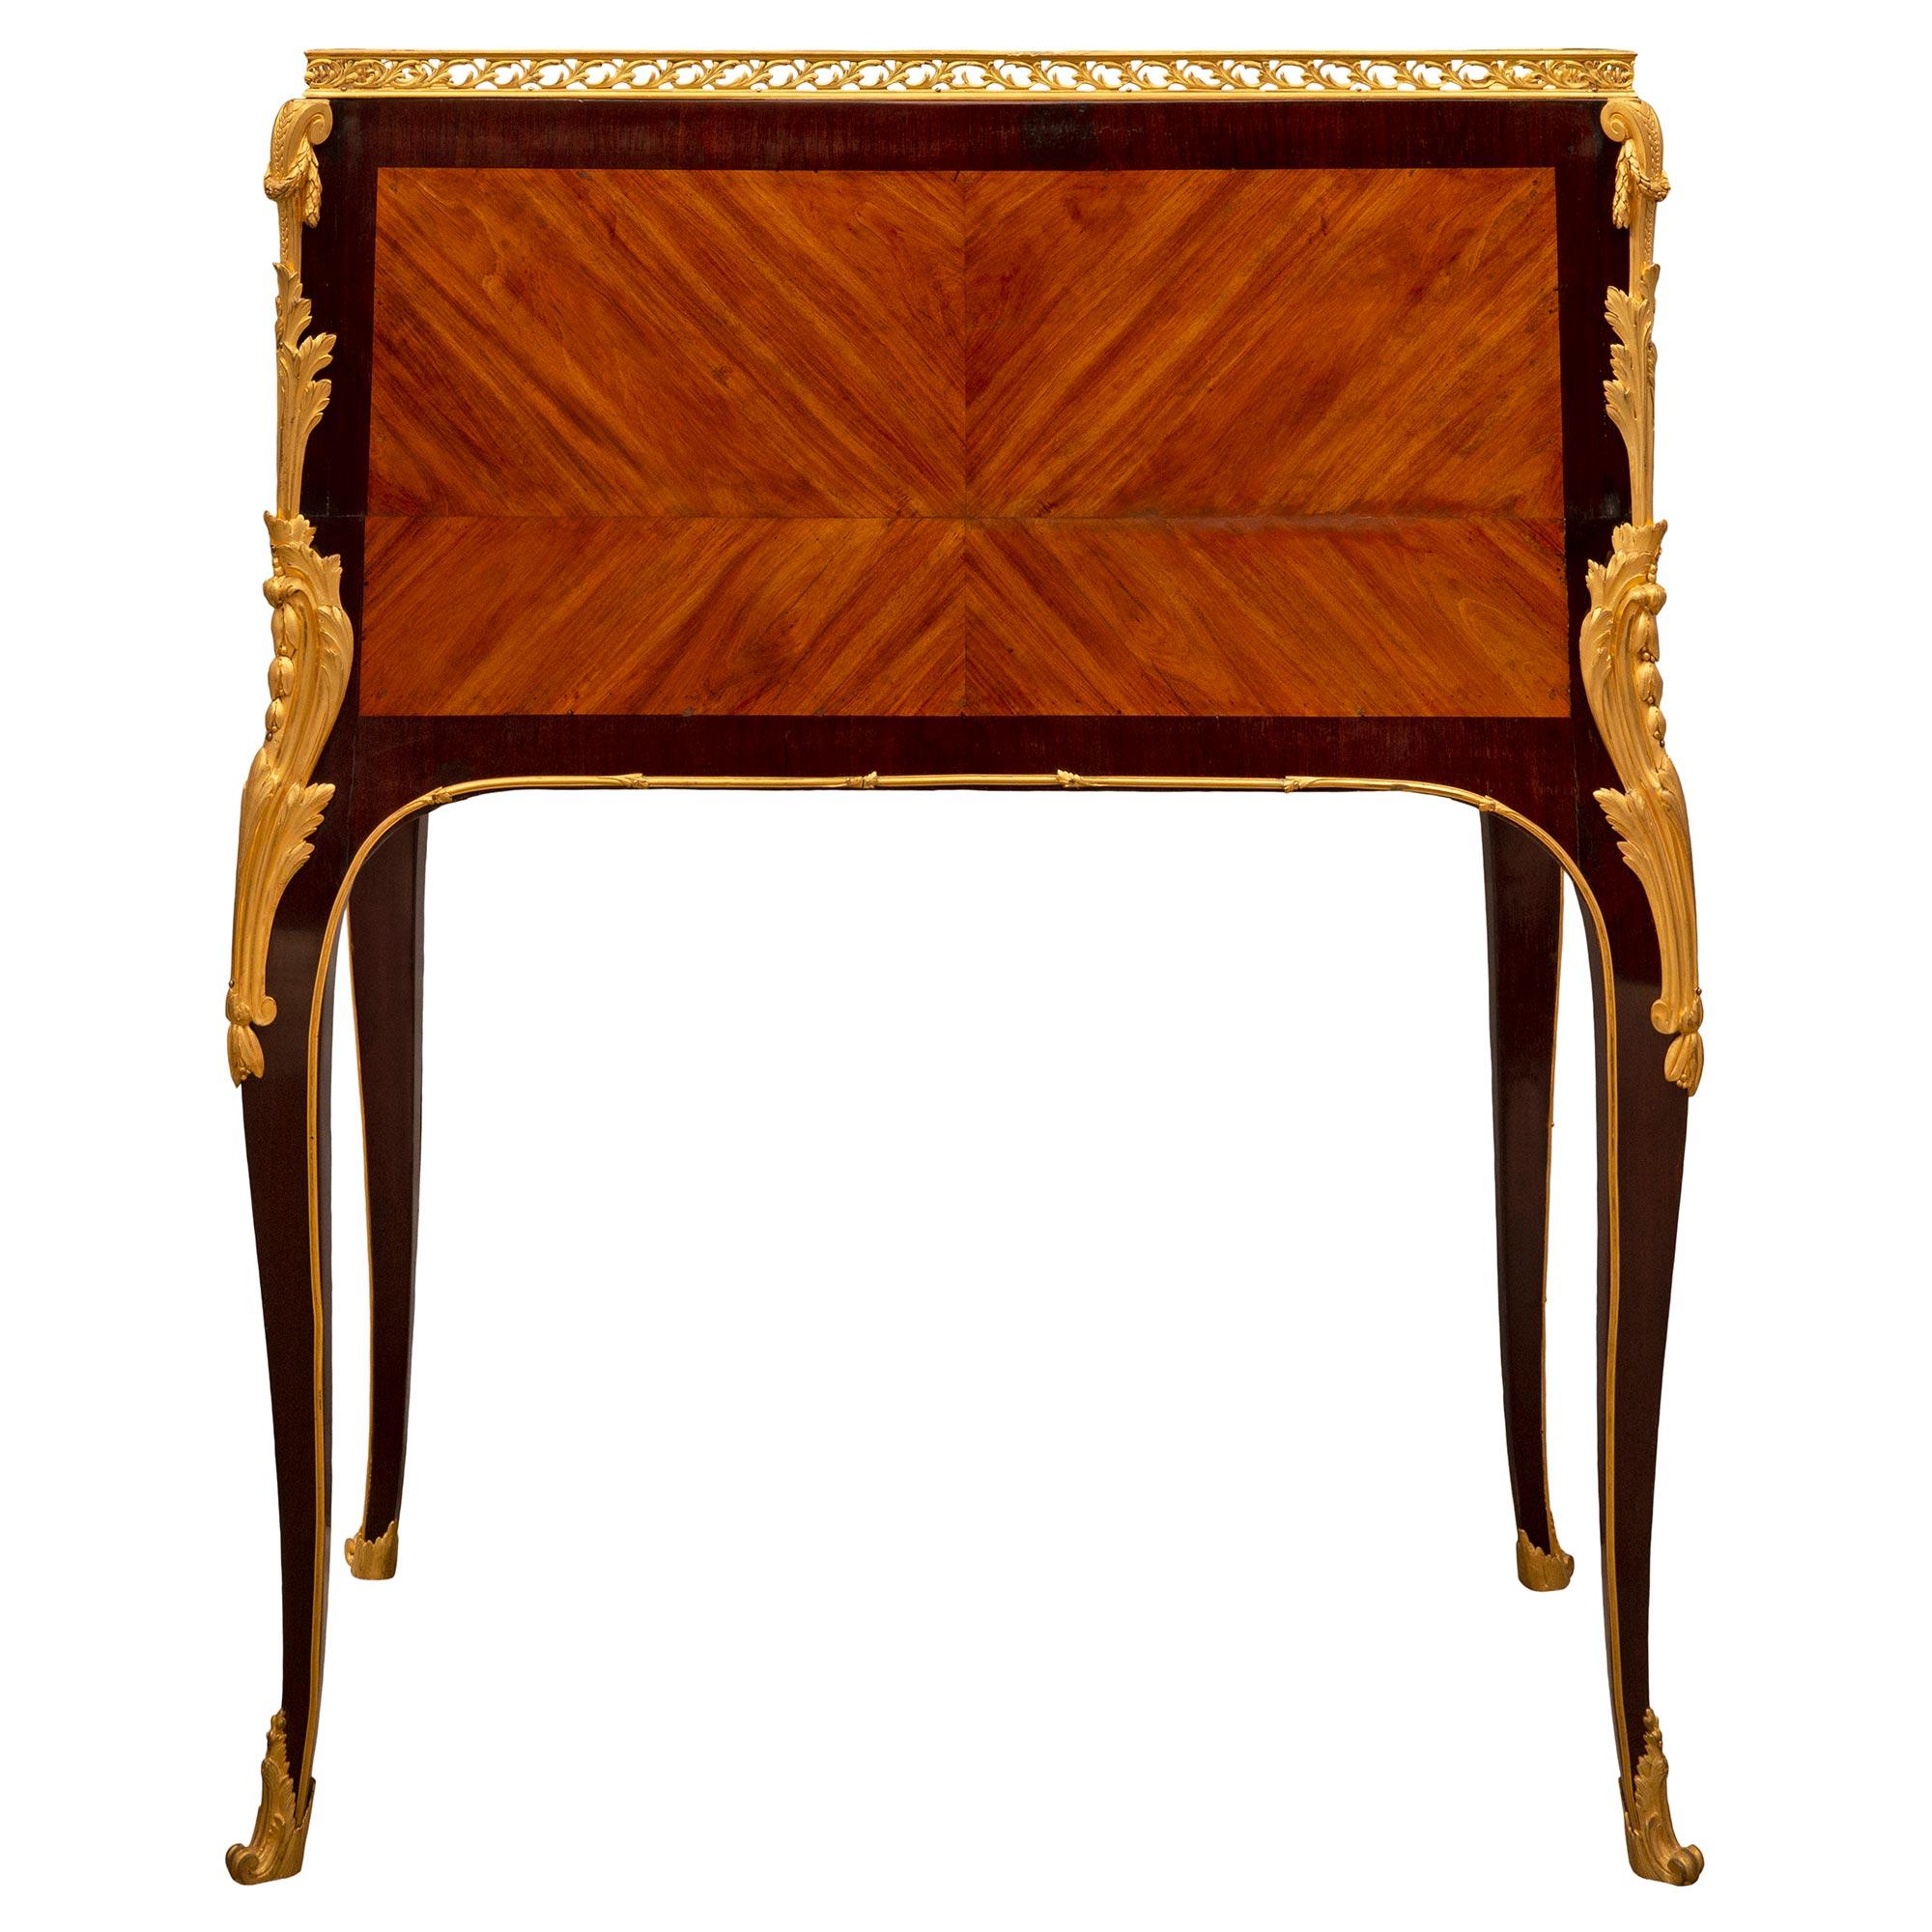 French 18th Century Louis XV Period Kingwood, Tulipwood and Ormolu Desk For Sale 1